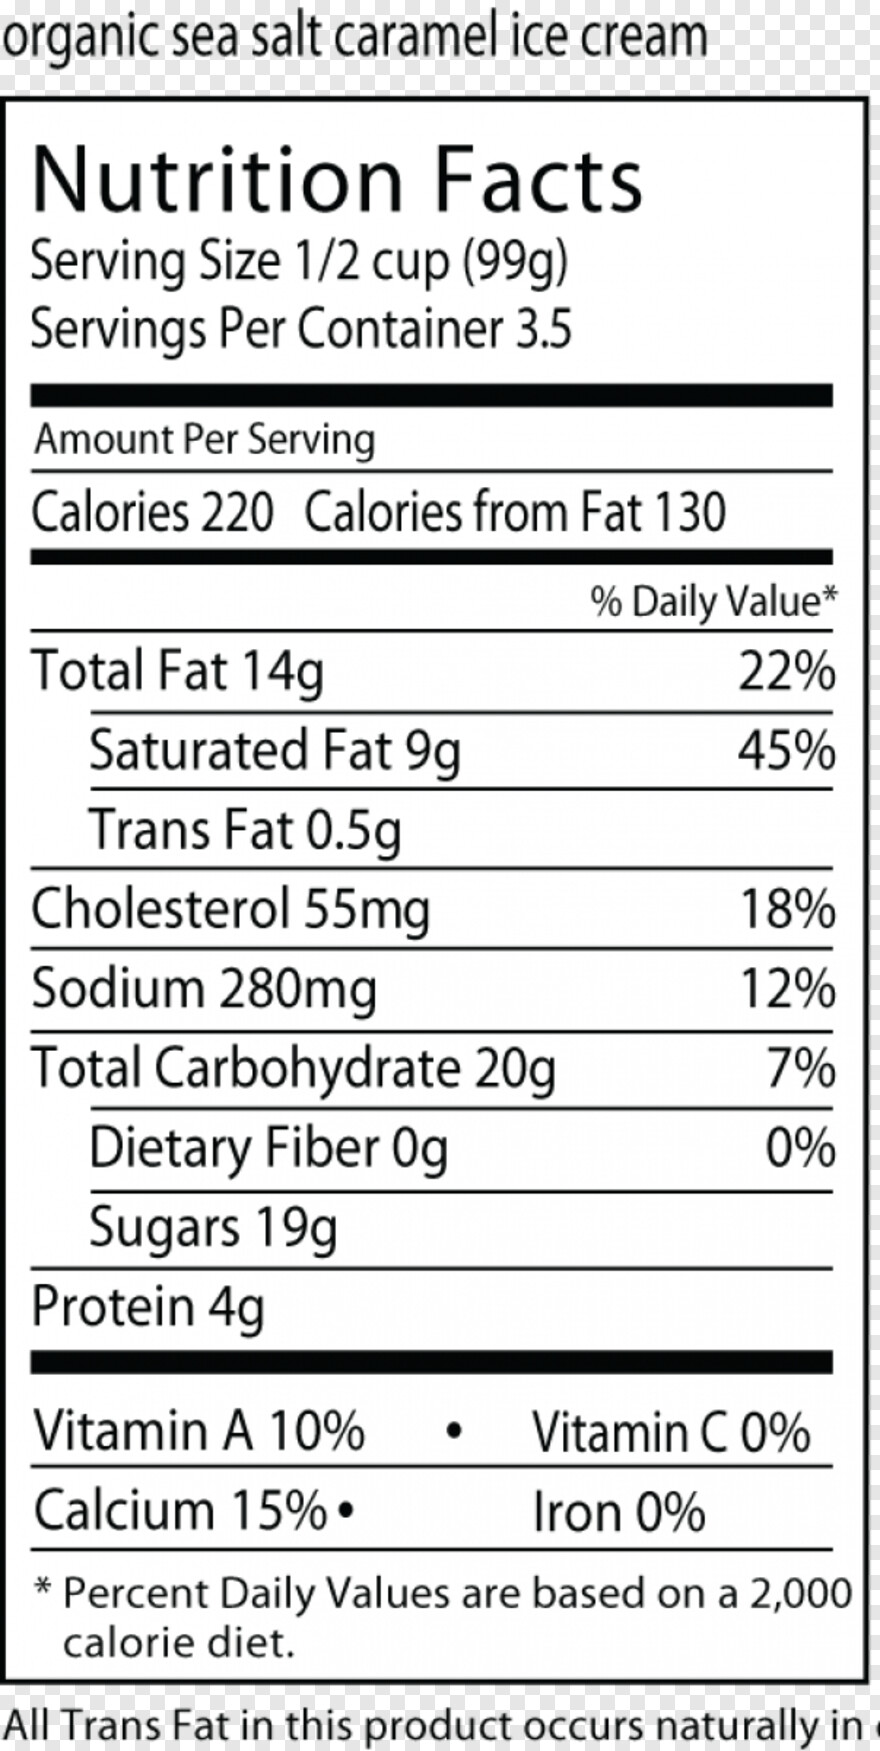 nutrition-facts # 848615